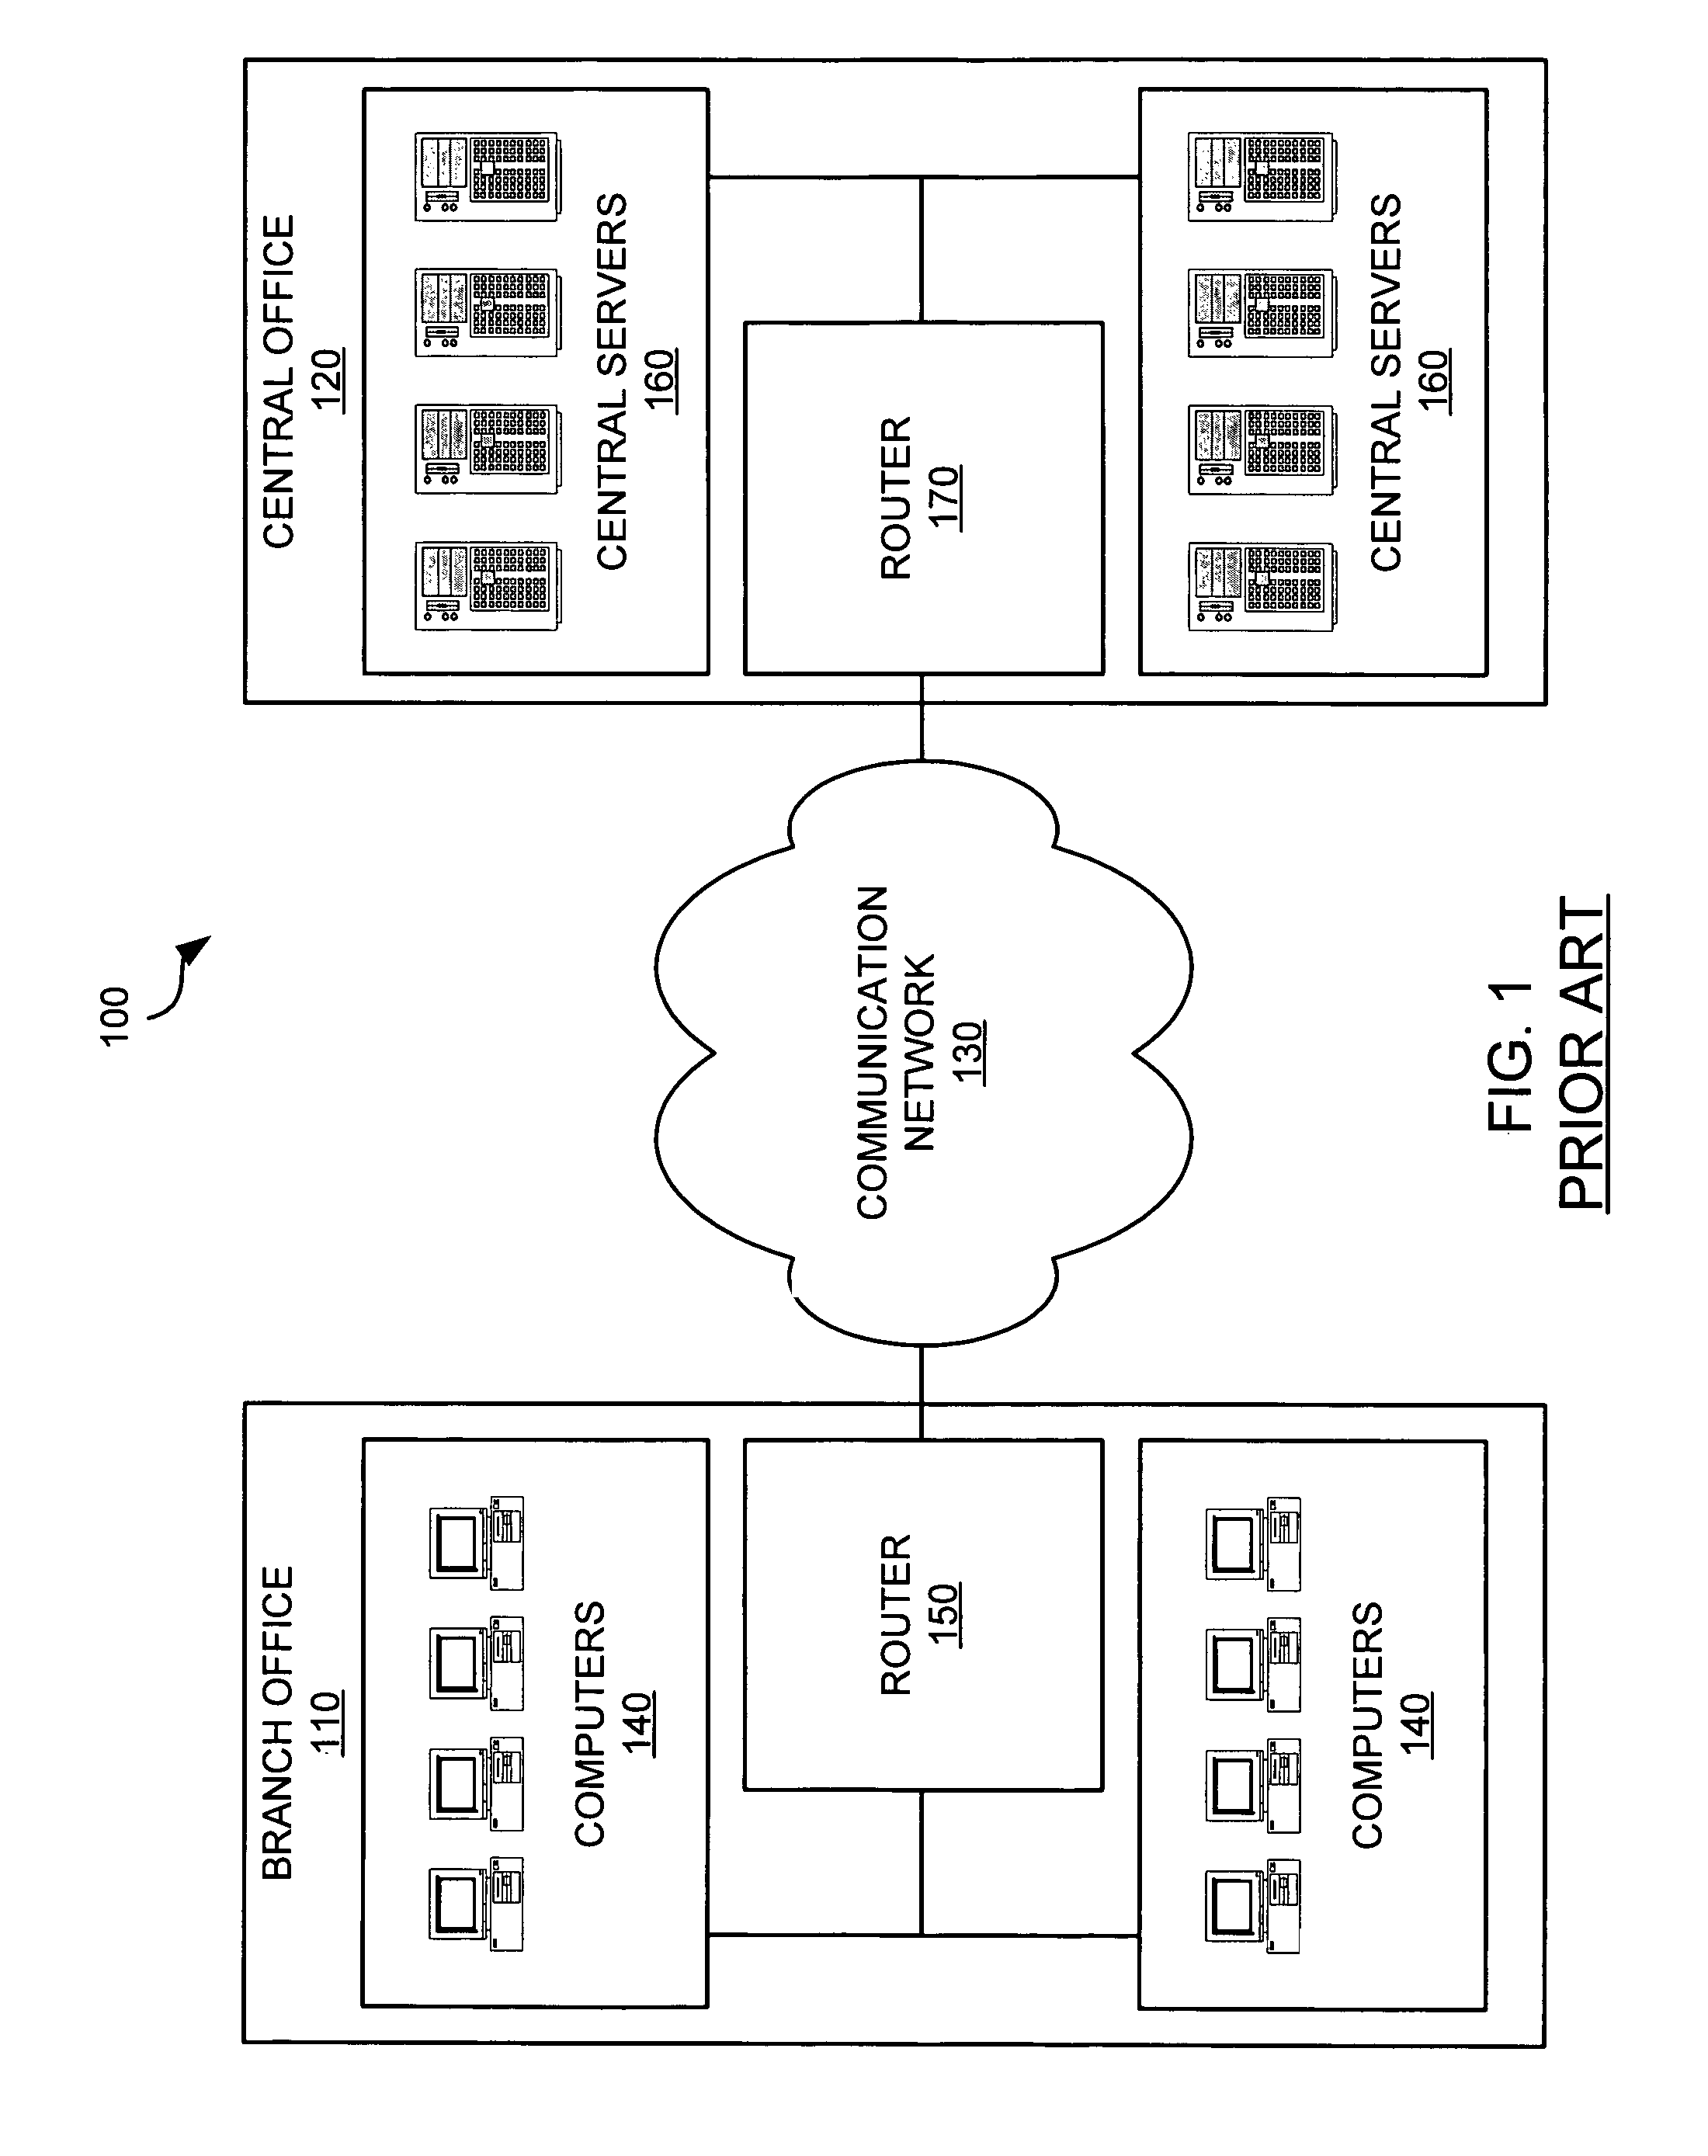 Network memory appliance for providing data based on local accessibility